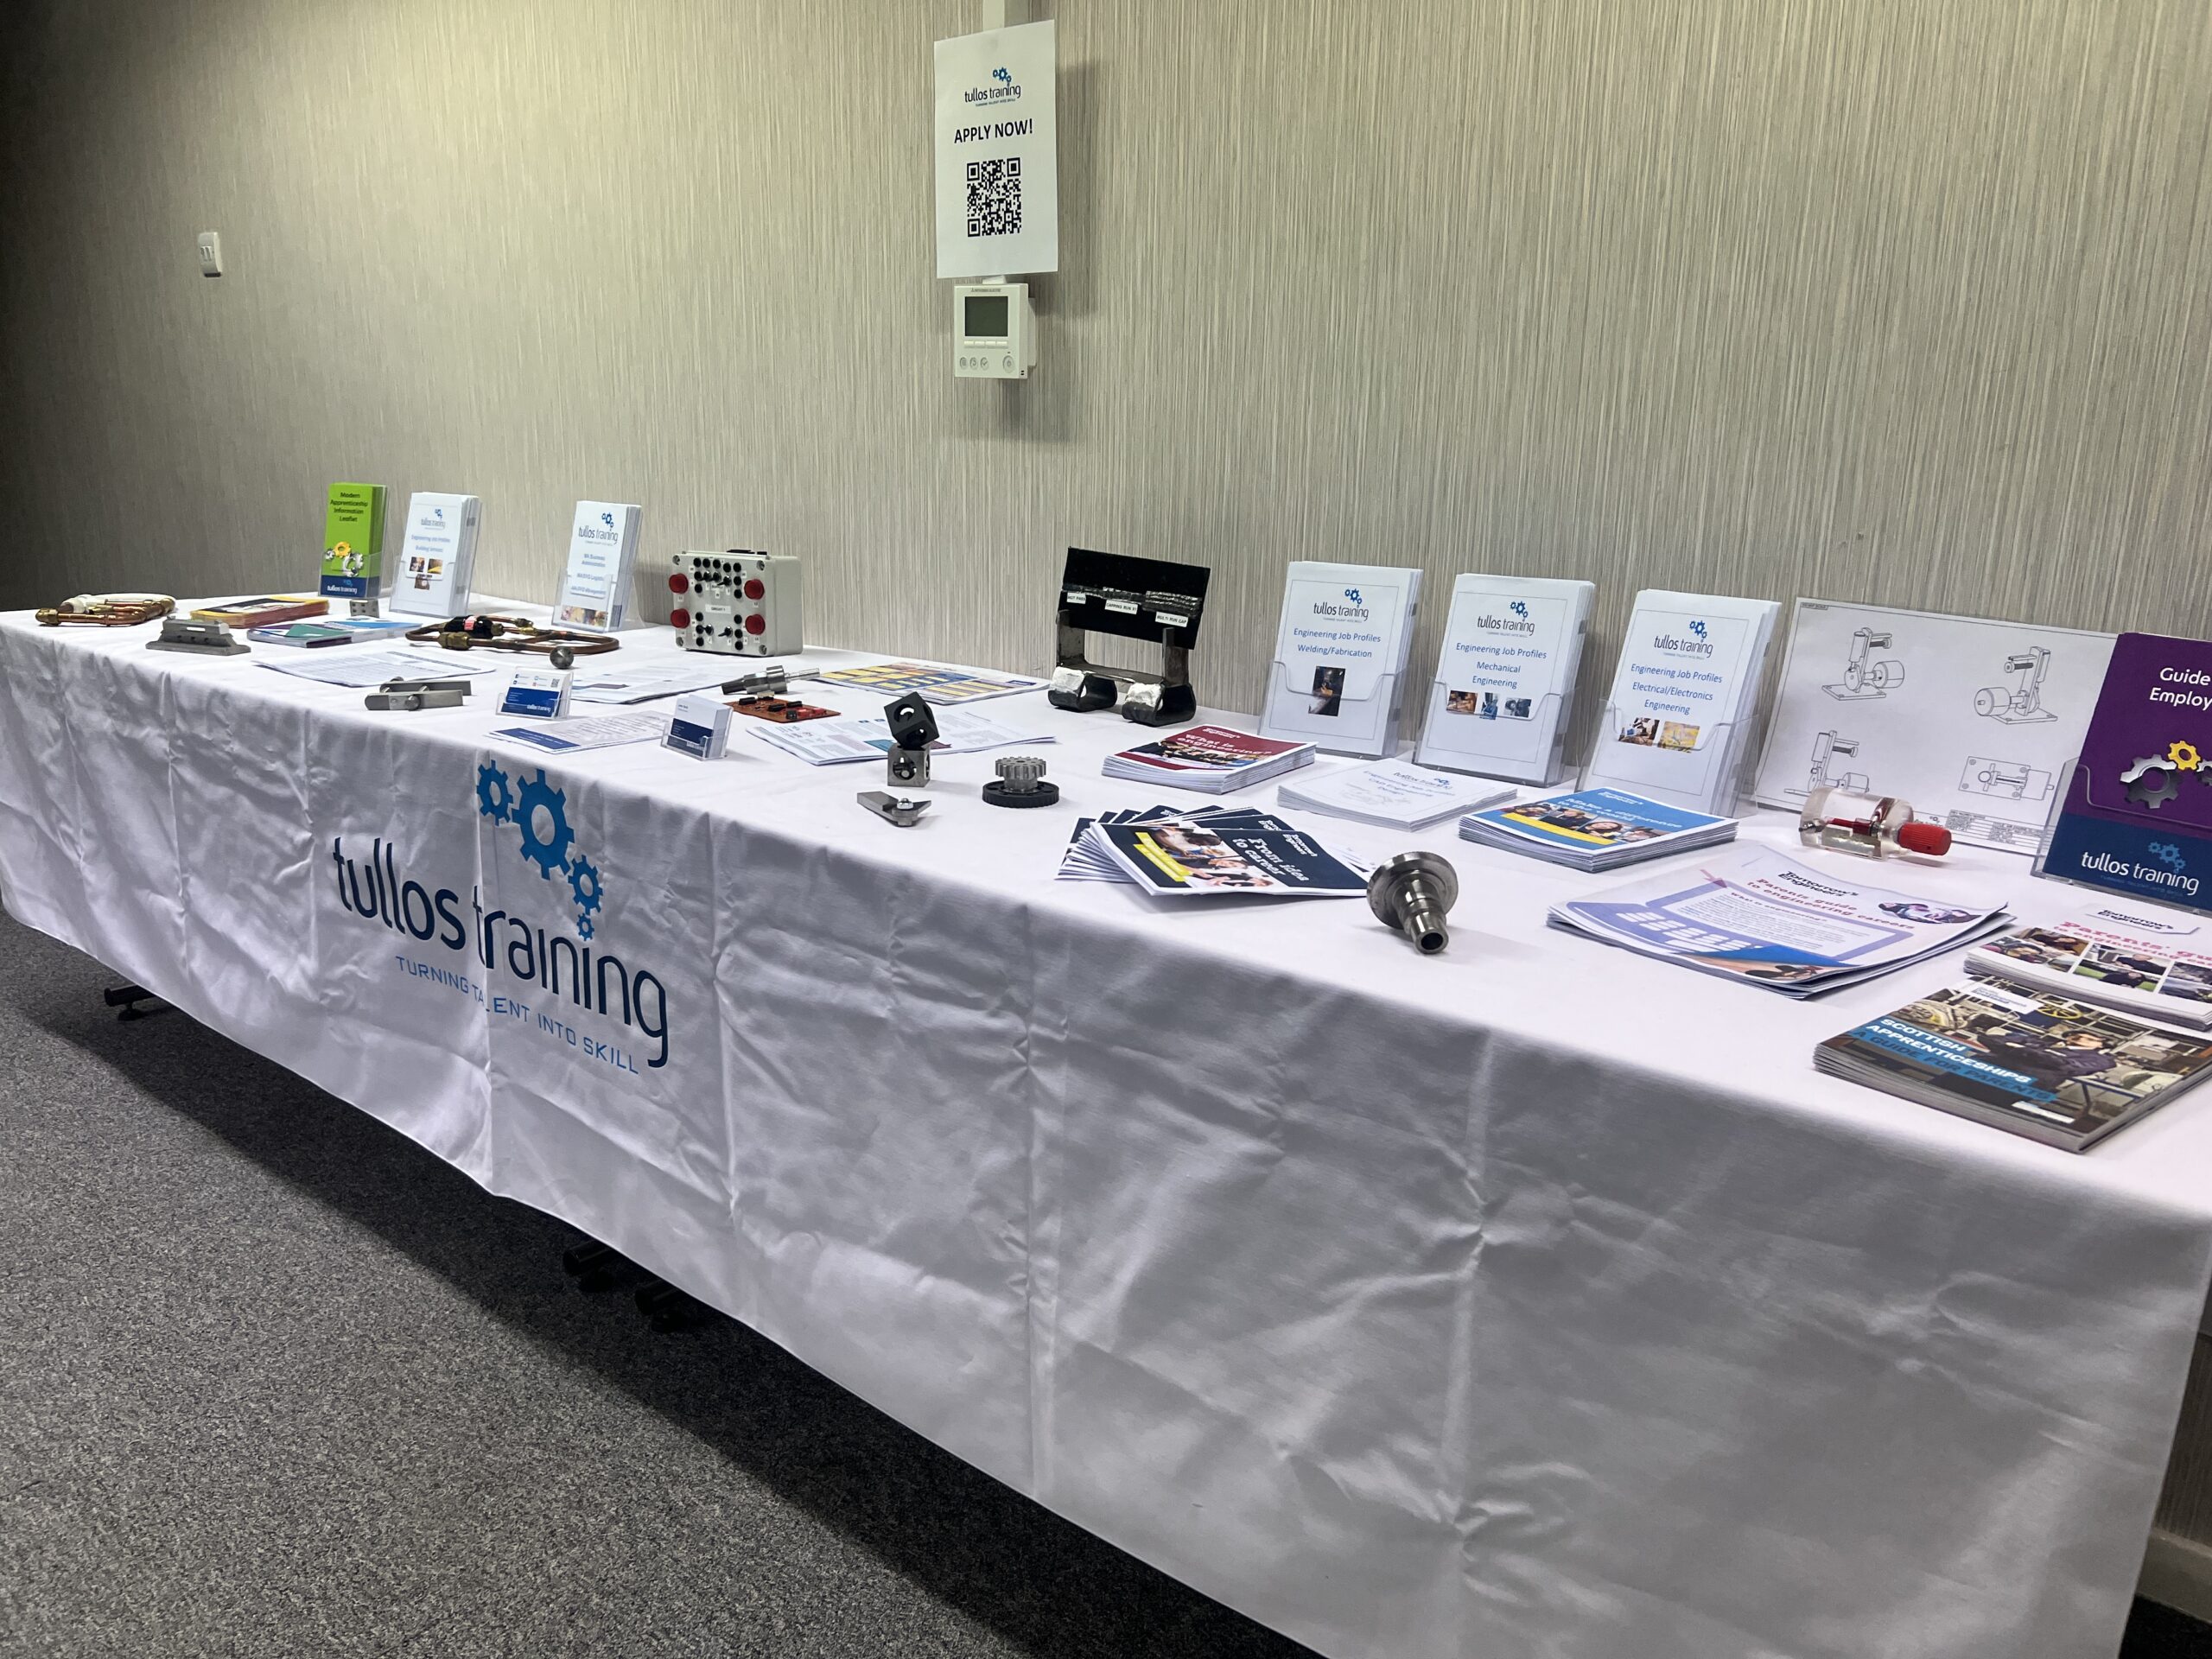 Image shows Tullos Training's careers fair table set up with a white branded table cloth.  Informational leaflets are displayed on the table along with example pieces from their engineering related and plumbing workshops.